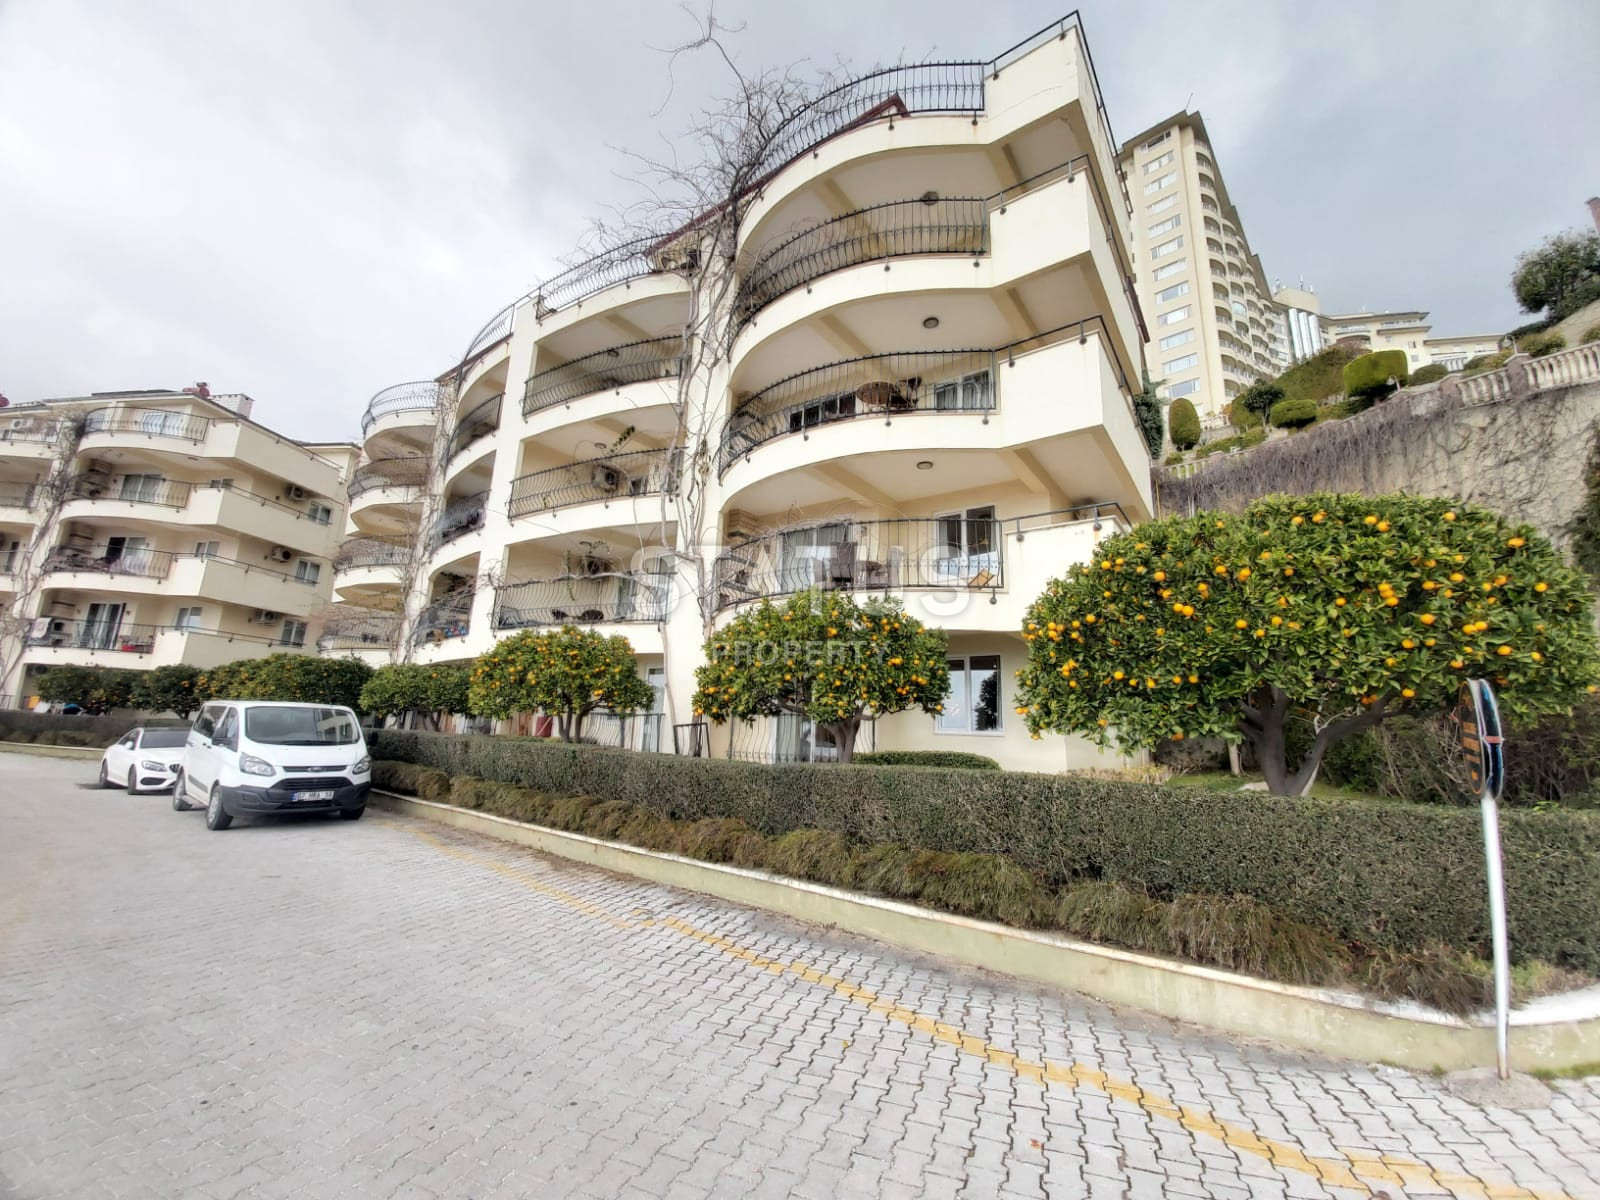 Duplex with a garden in one of the richest complexes in Kargicak. 150m2 фото 1